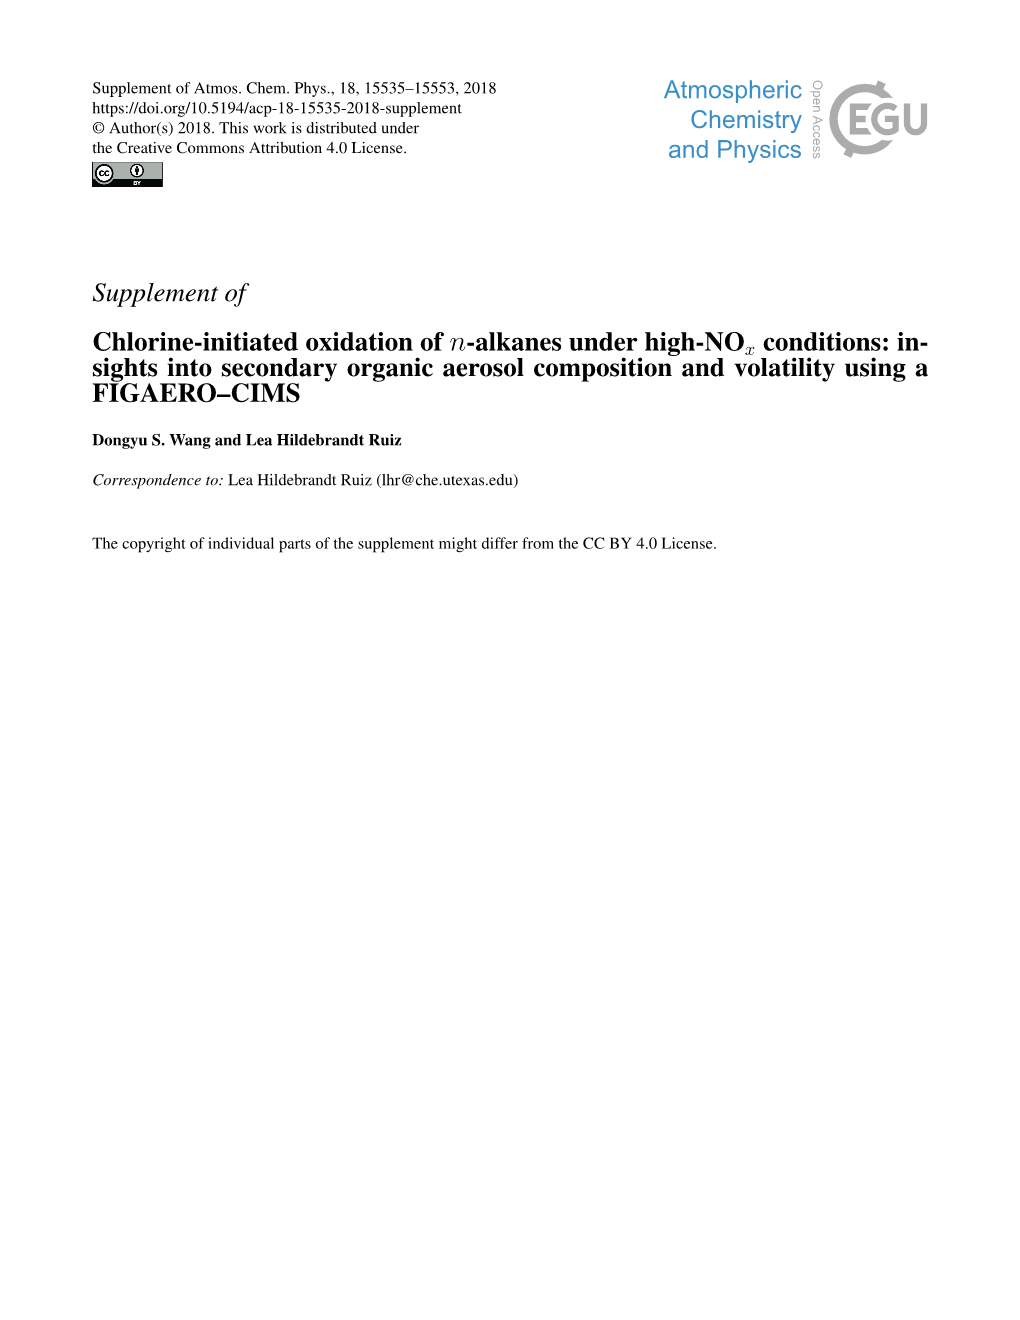 Supplement of Chlorine-Initiated Oxidation of N-Alkanes Under High